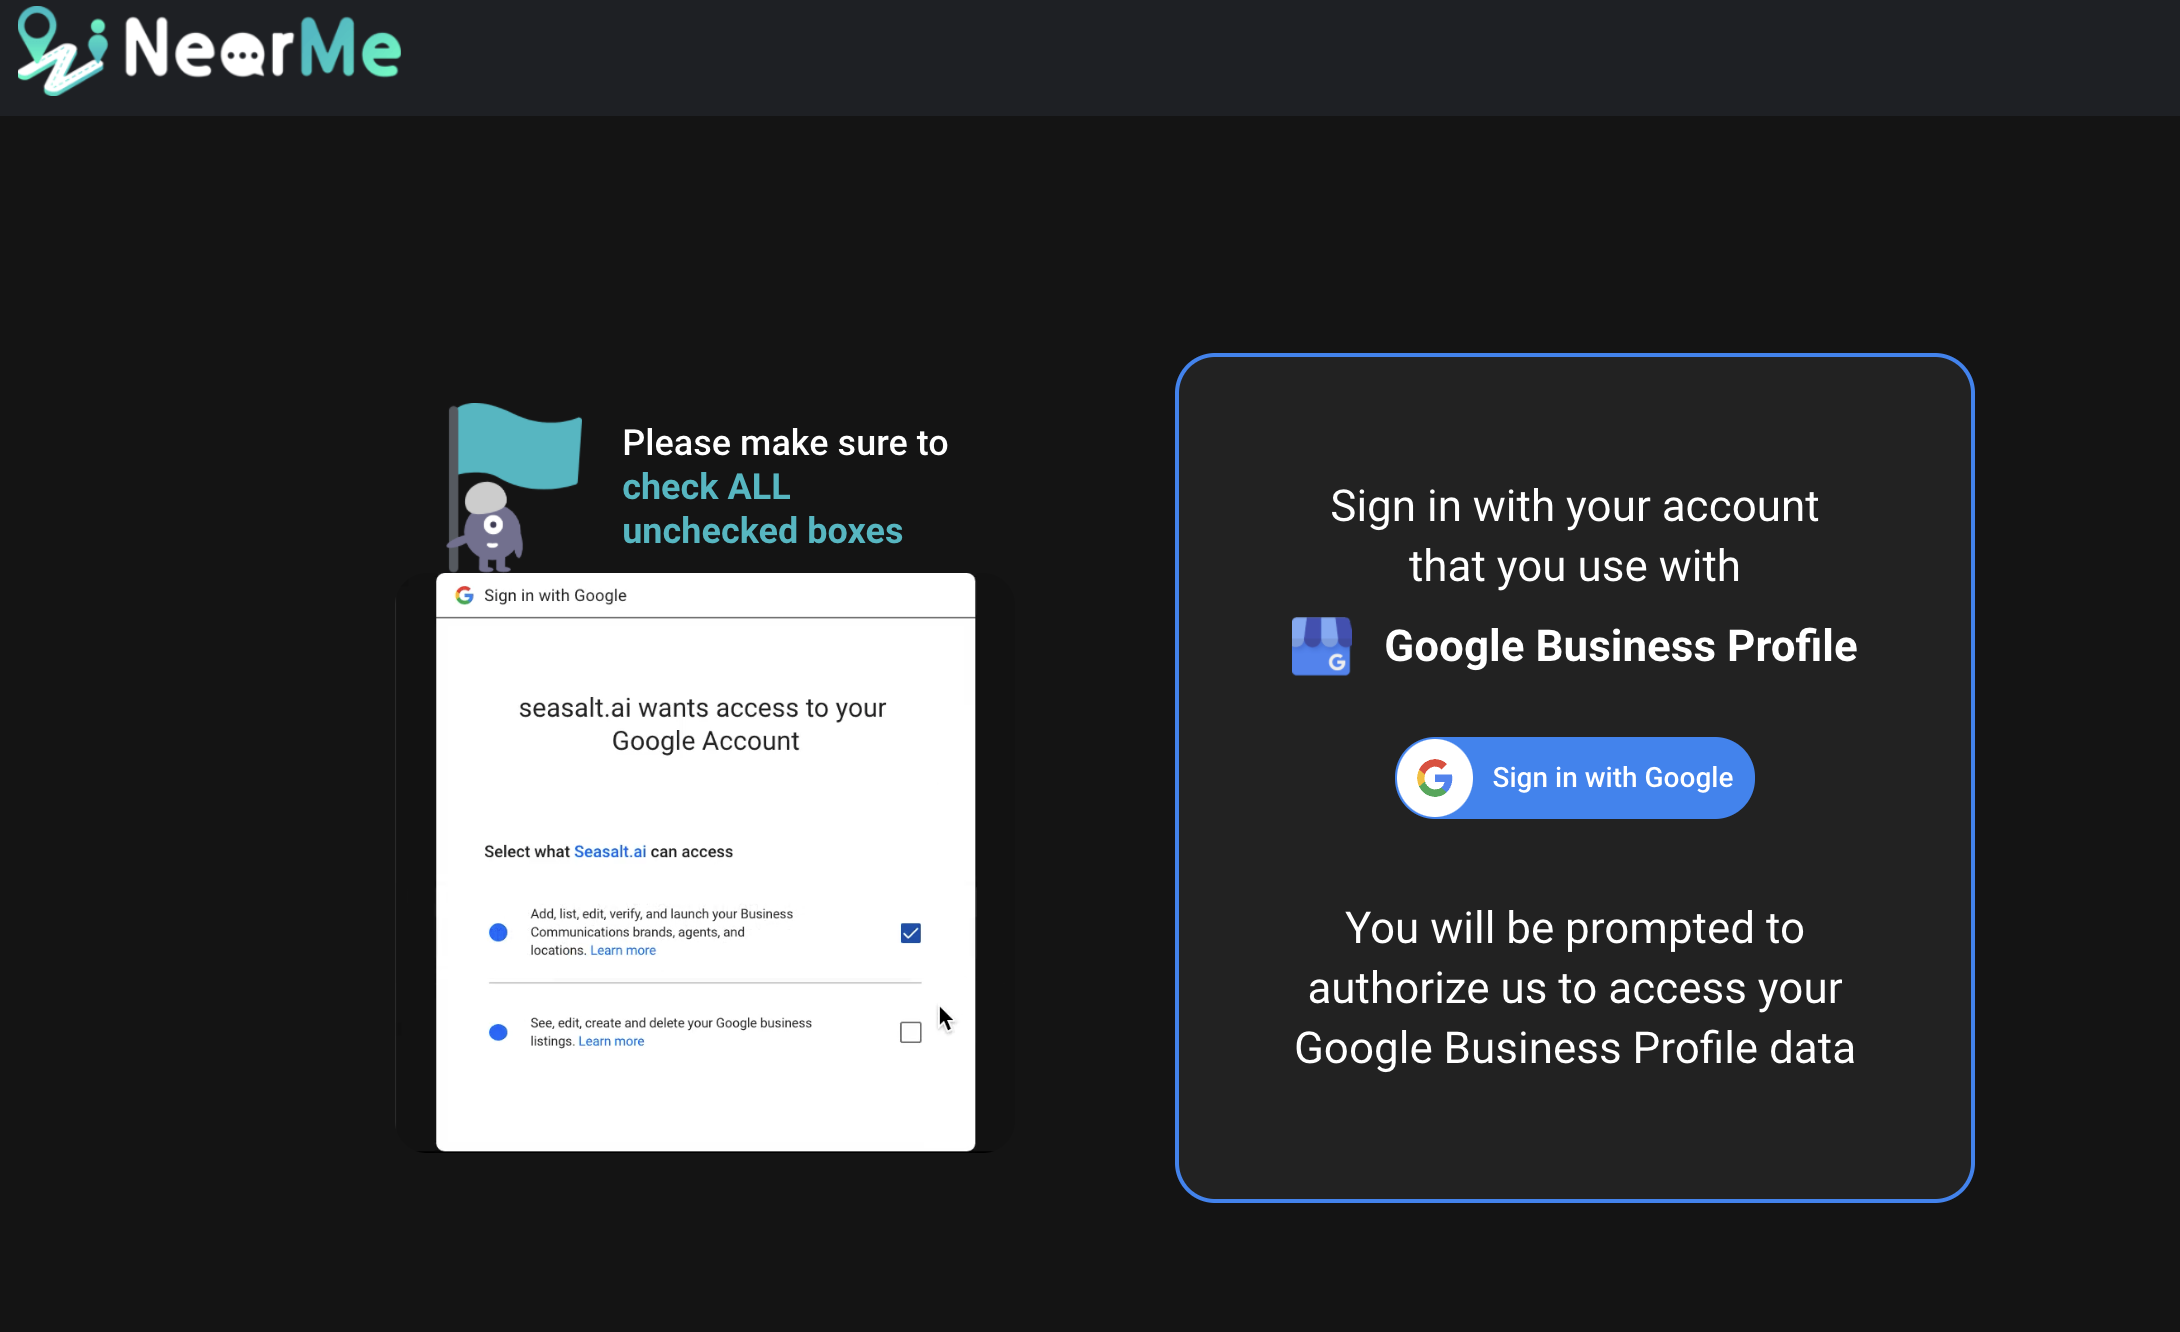 Sign in with the account that you use for Google Business Profile